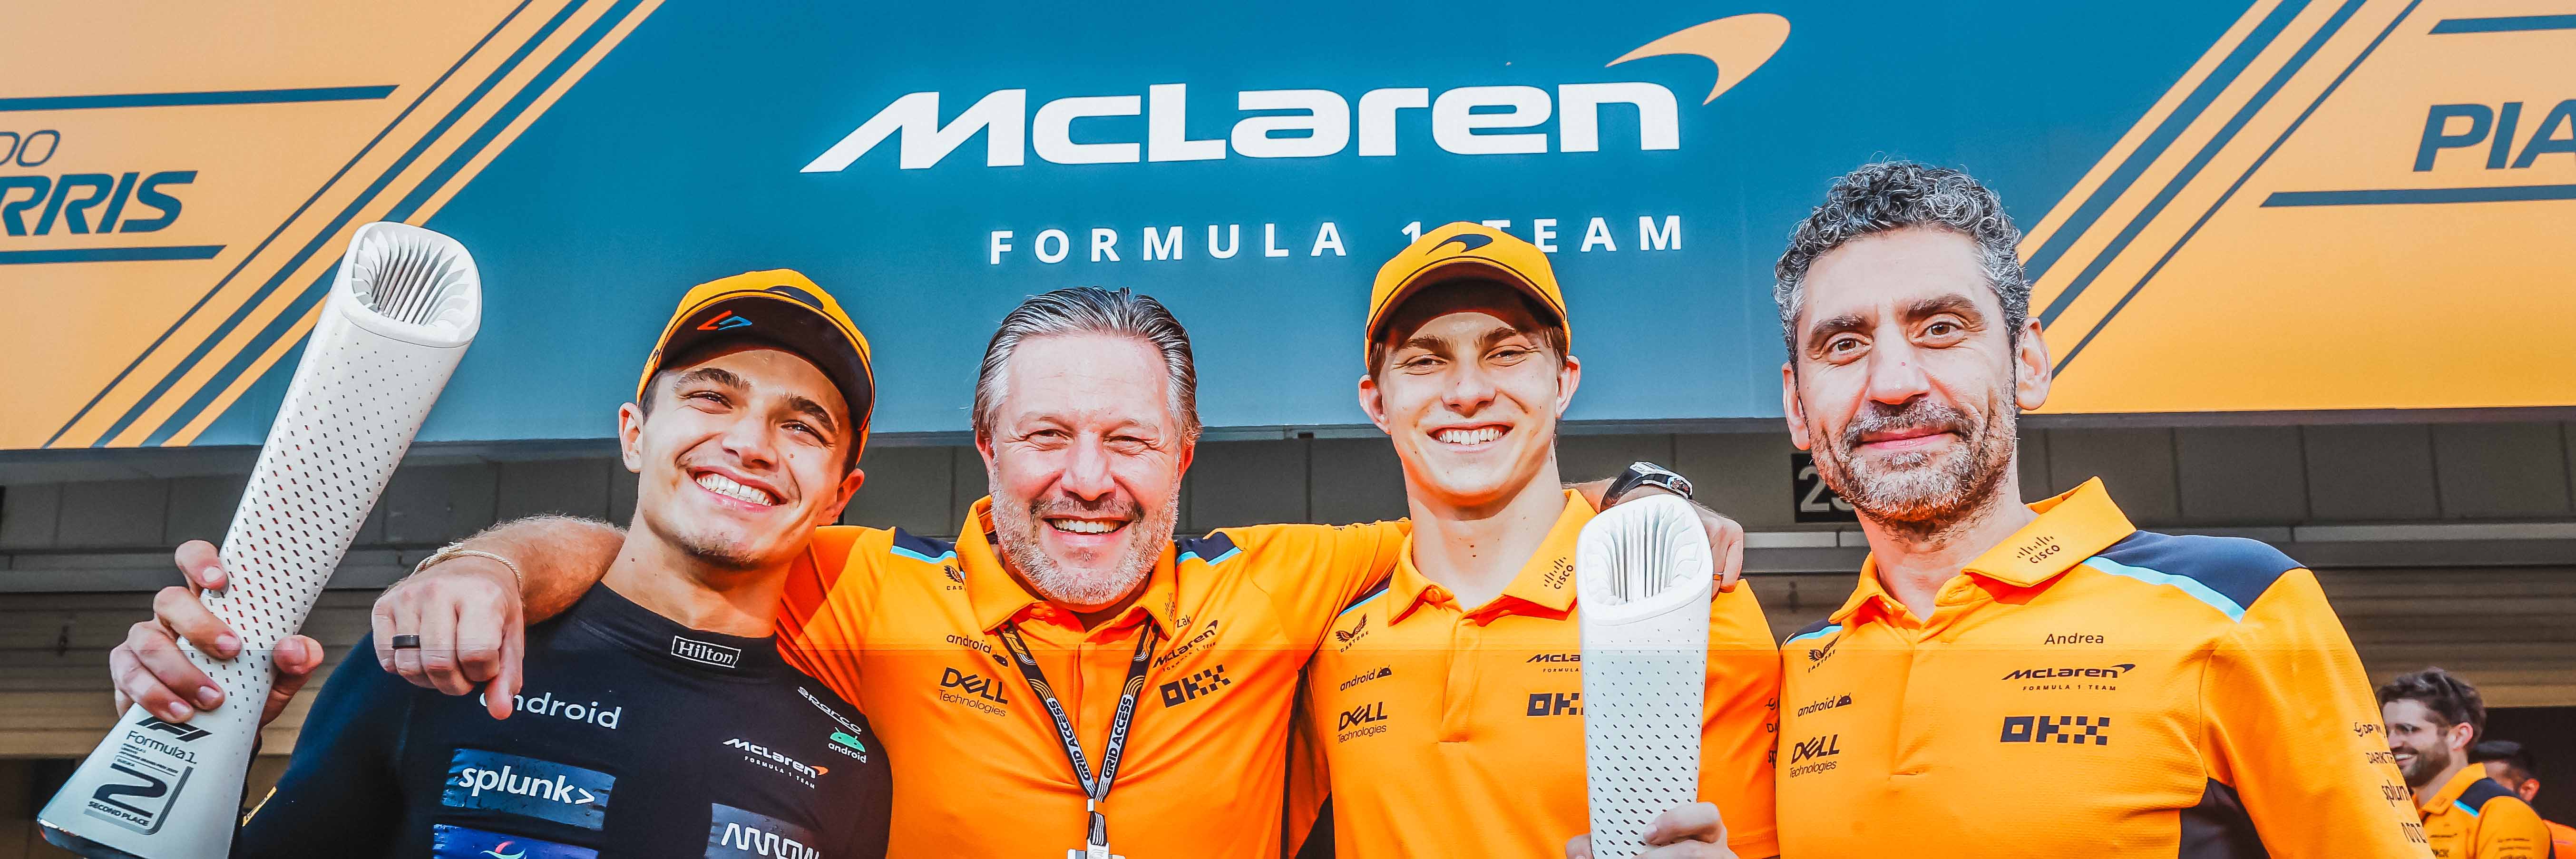 The McLaren F1 team celebrating after the Japanese Grand Prix